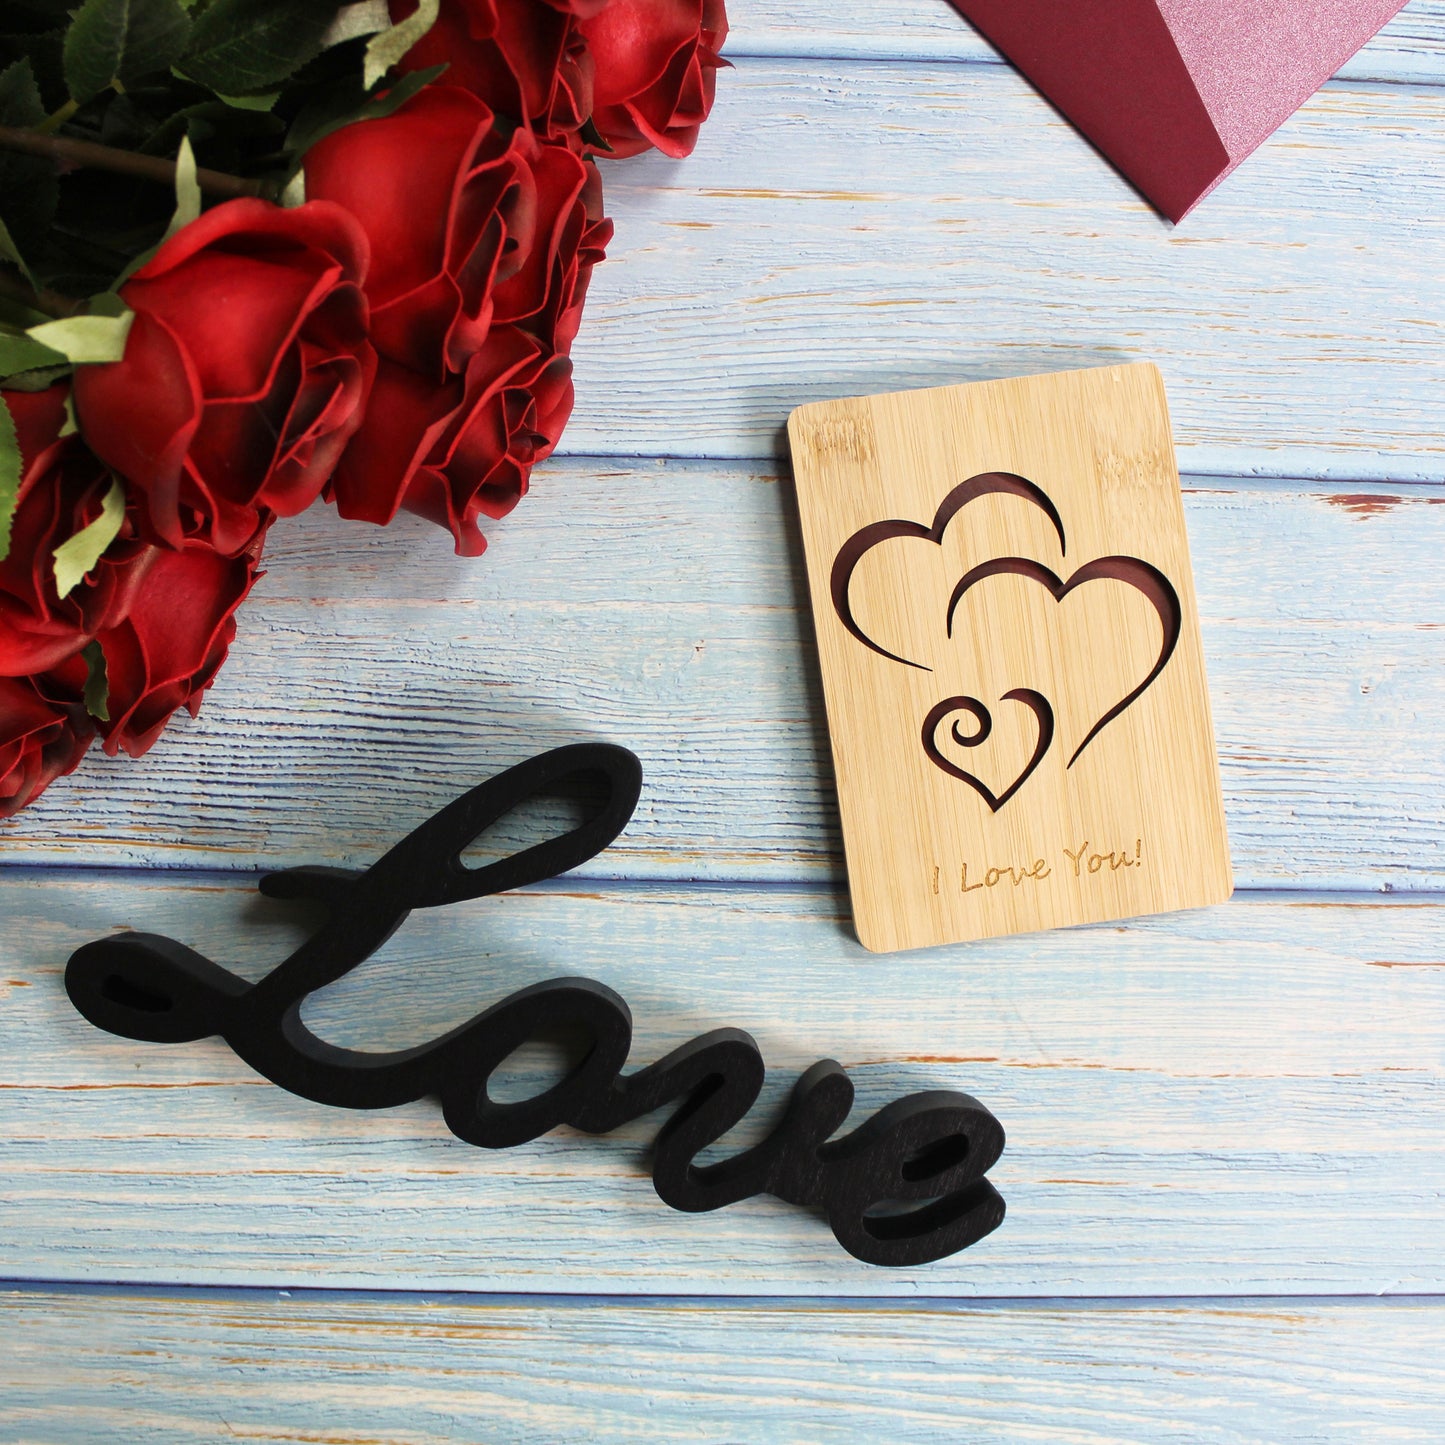 CVHOMEDECO. I Love You Card Greeting Cards Handmade with Natural Bamboo Wood, Idea Gifts for Wife, Him, Her or Just Because, Valentines Day Anniversary Birthdays Mother's Day Gift Card